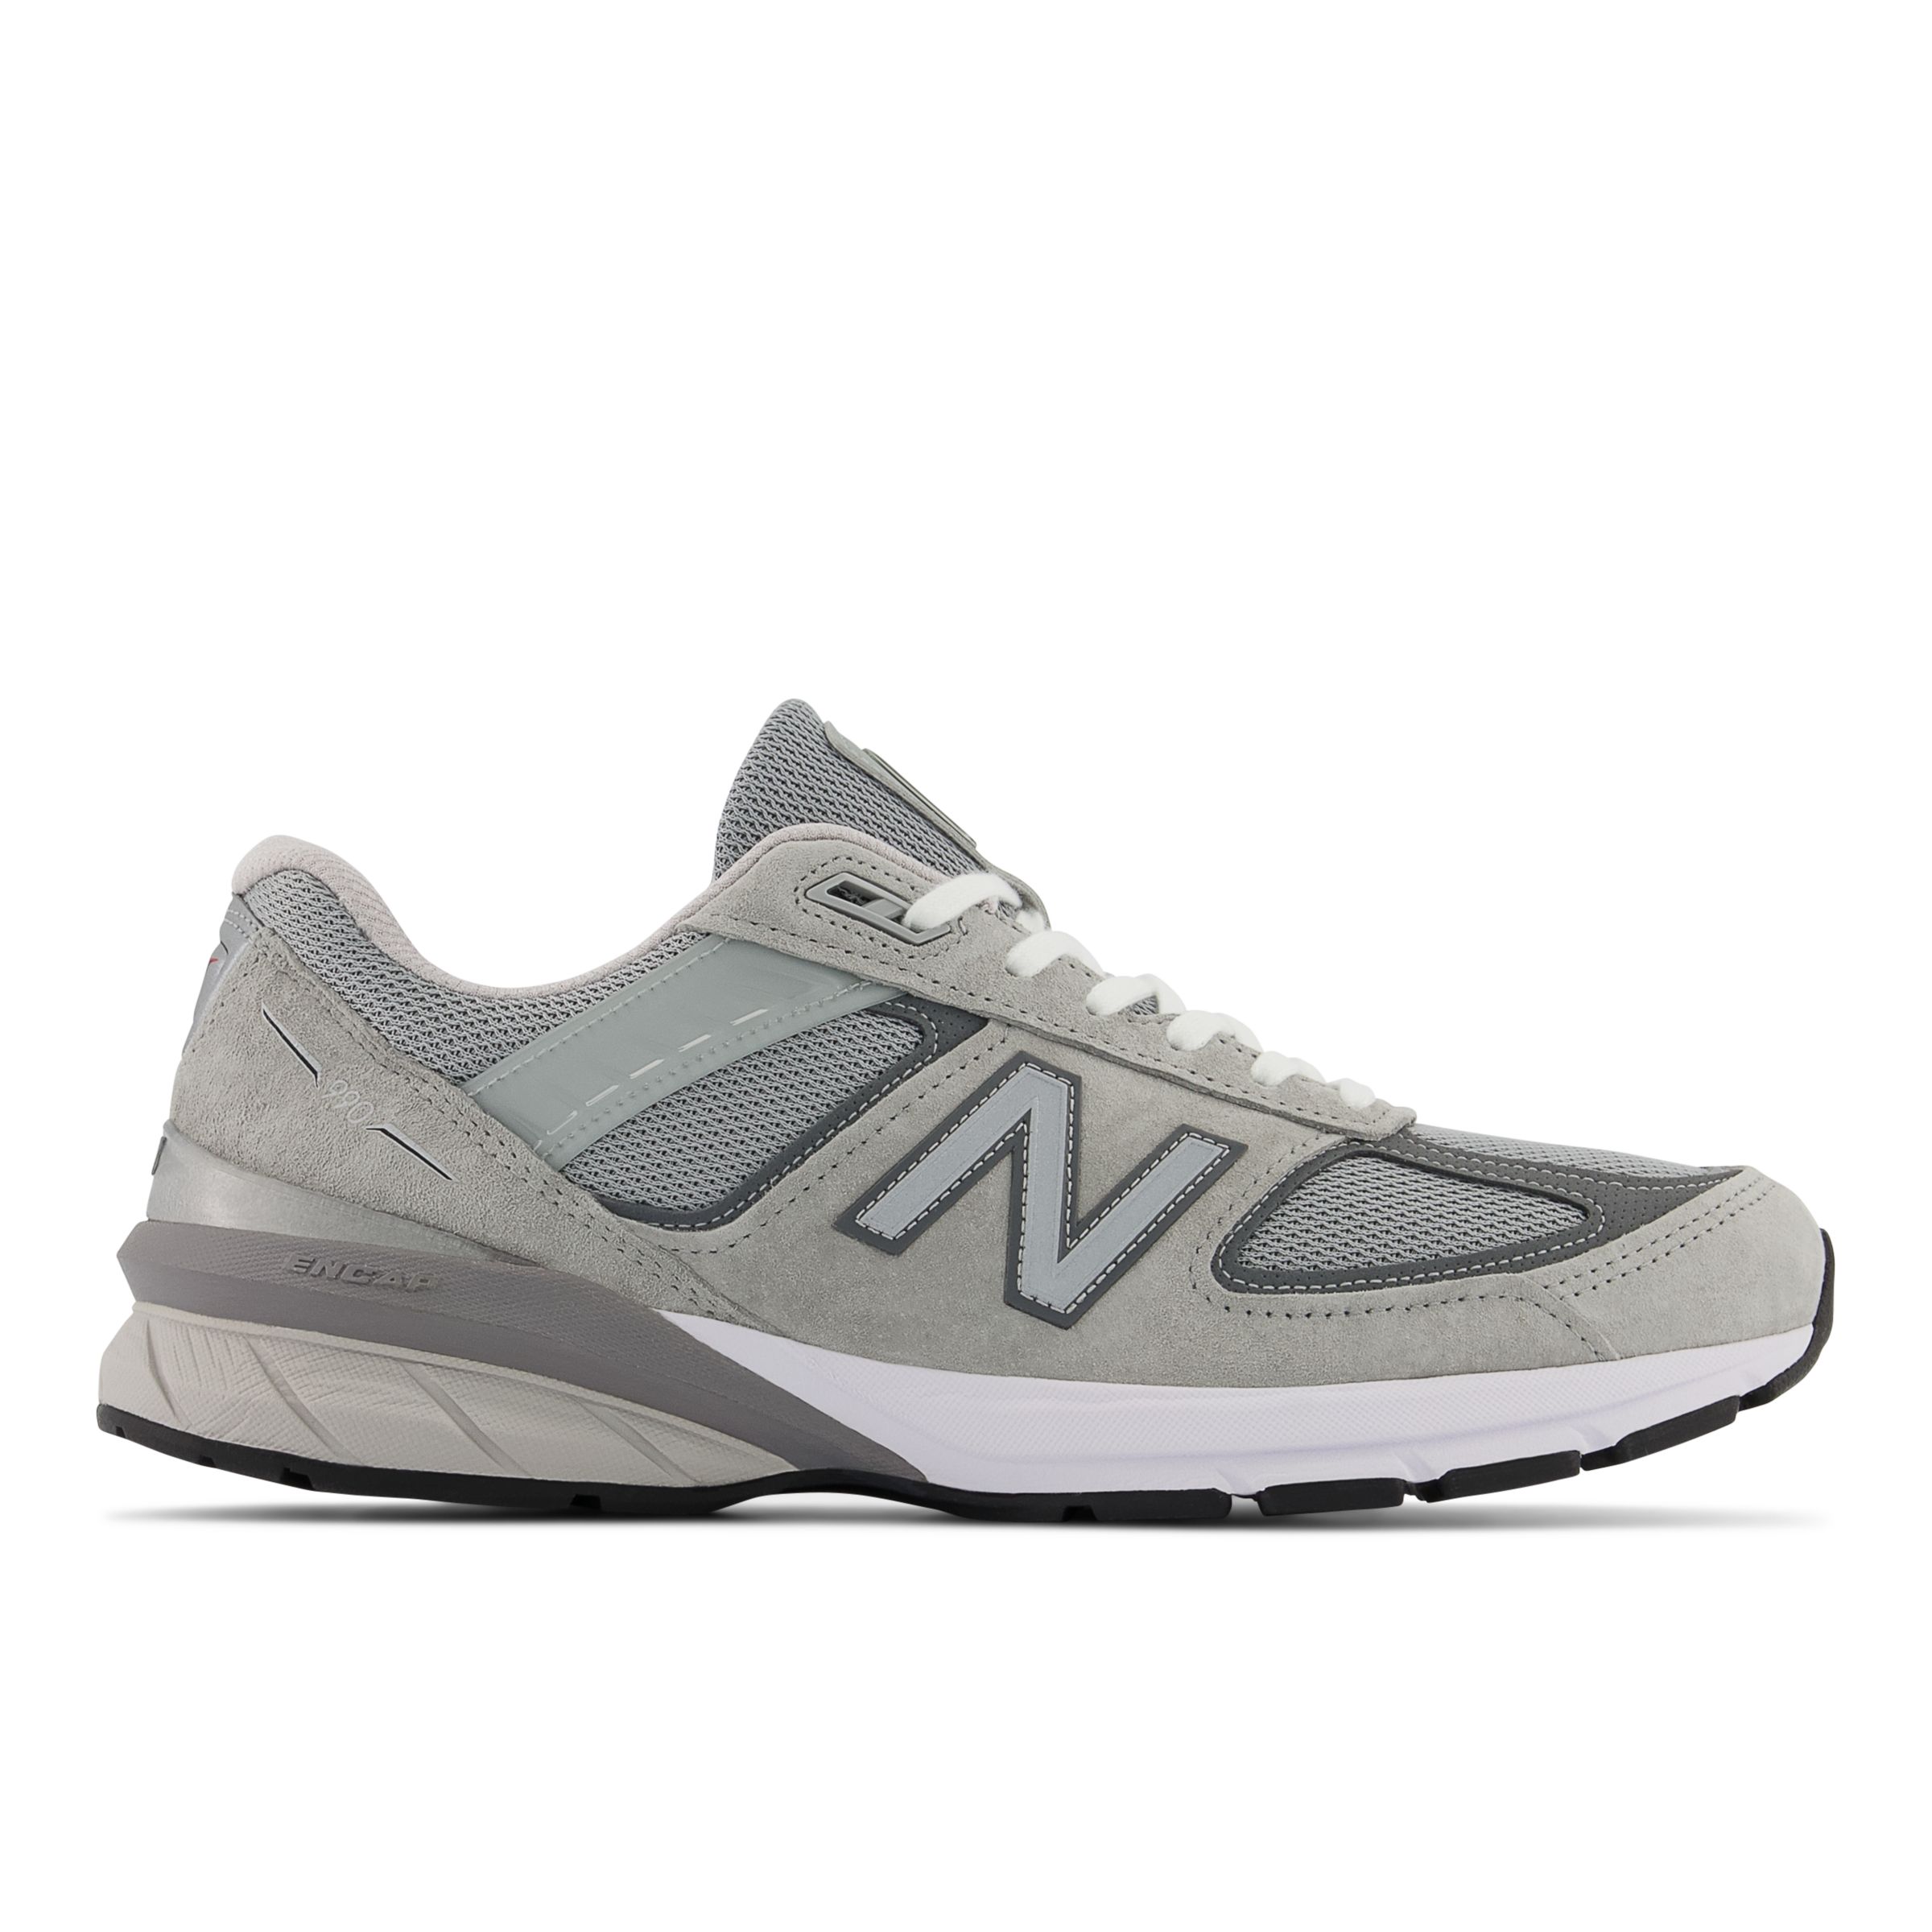 New Balance men's Blue Made In US 990 v5 Sneakers